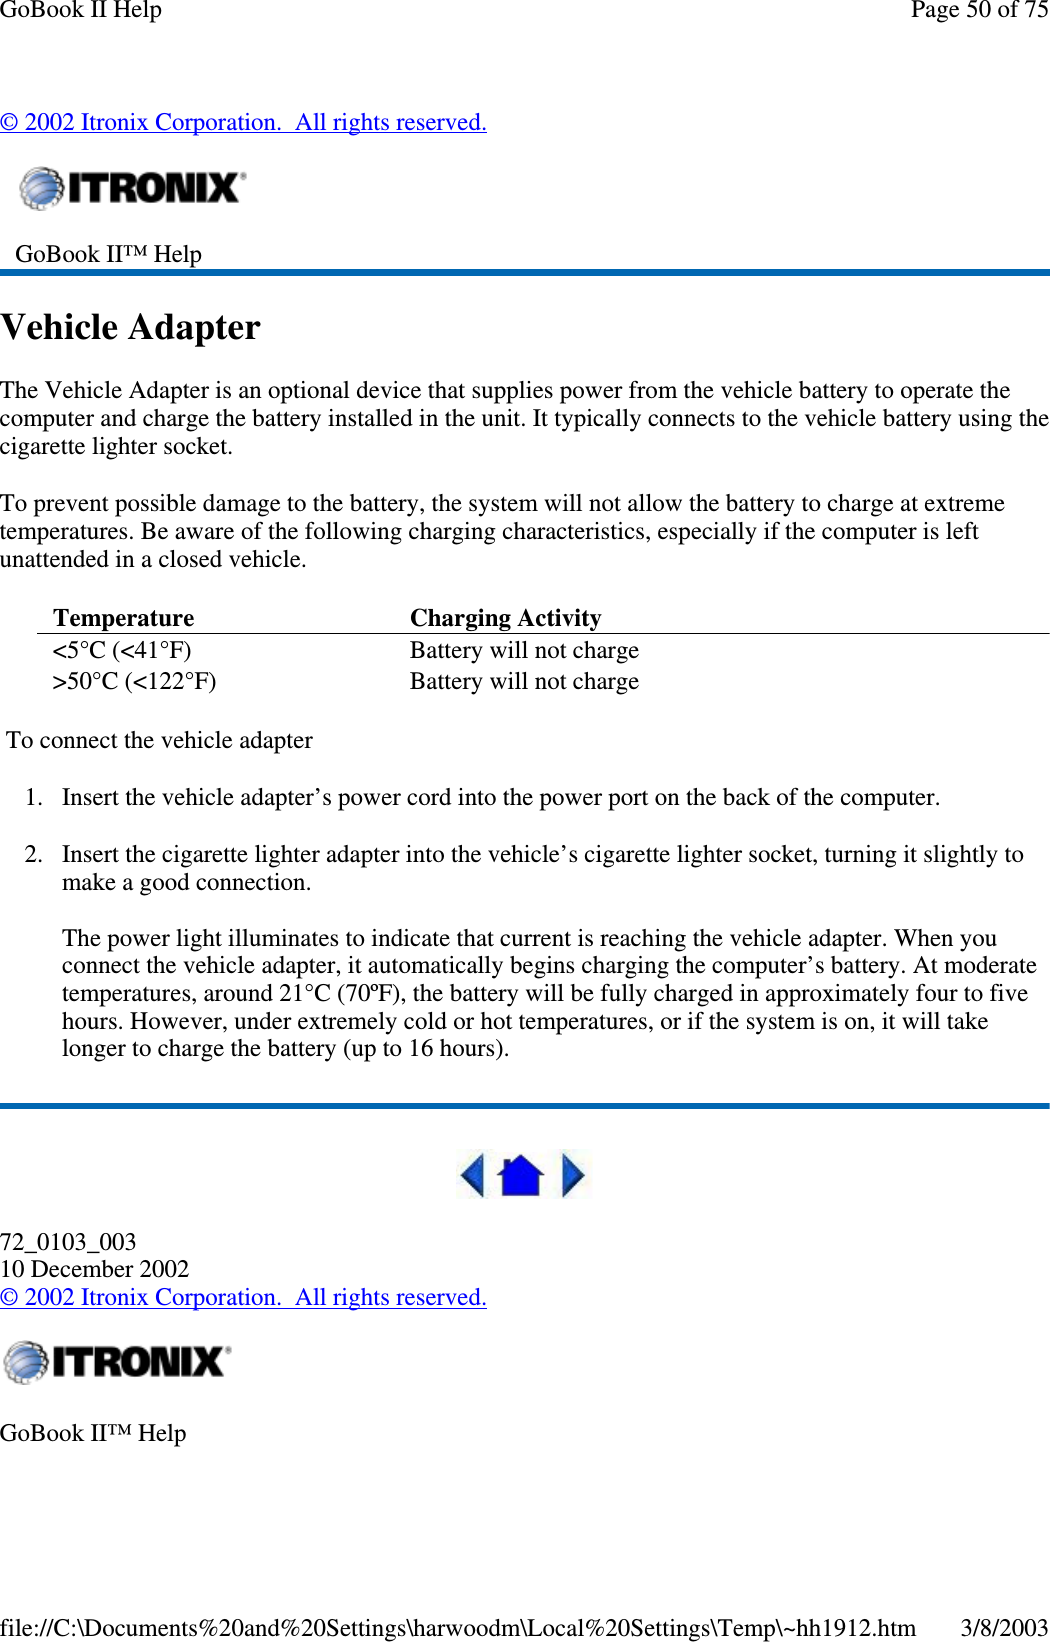 ©2002 Itronix Corporation. All rights reserved.Vehicle AdapterThe Vehicle Adapter is an optional device that supplies power from the vehicle battery to operate thecomputer and charge the battery installed in the unit. It typically connects to the vehicle battery using thecigarette lighter socket.To prevent possible damage to the battery, the system will not allow the battery to charge at extremetemperatures. Be aware of the following charging characteristics, especially if the computer is leftunattended in a closed vehicle.To connect the vehicle adapter1. Insert the vehicle adapter’s power cord into the power port on the back of the computer.2. Insert the cigarette lighter adapter into the vehicle’s cigarette lighter socket, turning it slightly tomake a good connection.The power light illuminates to indicate that current is reaching the vehicle adapter. When youconnect the vehicle adapter, it automatically begins charging the computer’s battery. At moderatetemperatures, around 21°C (70ºF), the battery will be fully charged in approximately four to fivehours. However, under extremely cold or hot temperatures, or if the system is on, it will takelonger to charge the battery (up to 16 hours).72_0103_00310 December 2002©2002 Itronix Corporation. All rights reserved.GoBook II™ HelpTemperature Charging Activity&lt;5°C (&lt;41°F) Battery will not charge&gt;50°C (&lt;122°F) Battery will not chargeGoBook II™ HelpPage50of75GoBook II Help3/8/2003file://C:\Documents%20and%20Settings\harwoodm\Local%20Settings\Temp\~hh1912.htm